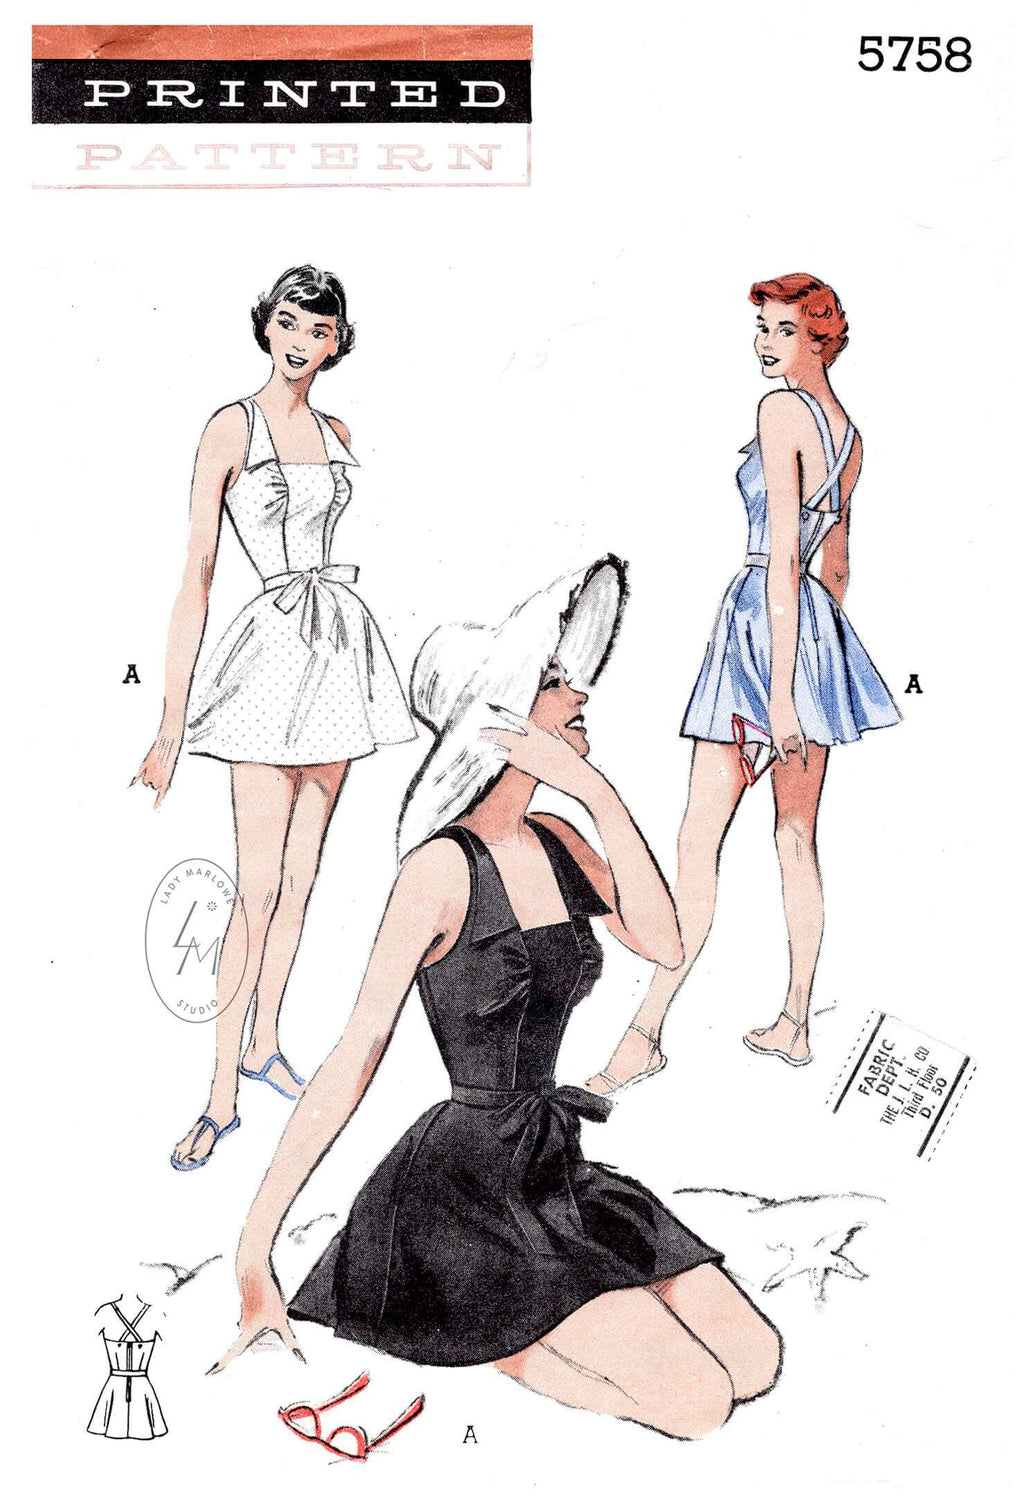 1950s 1951 playsuit vintage beachwear sewing pattern reproduction skater skirt front bodice ruching Butterick 5758